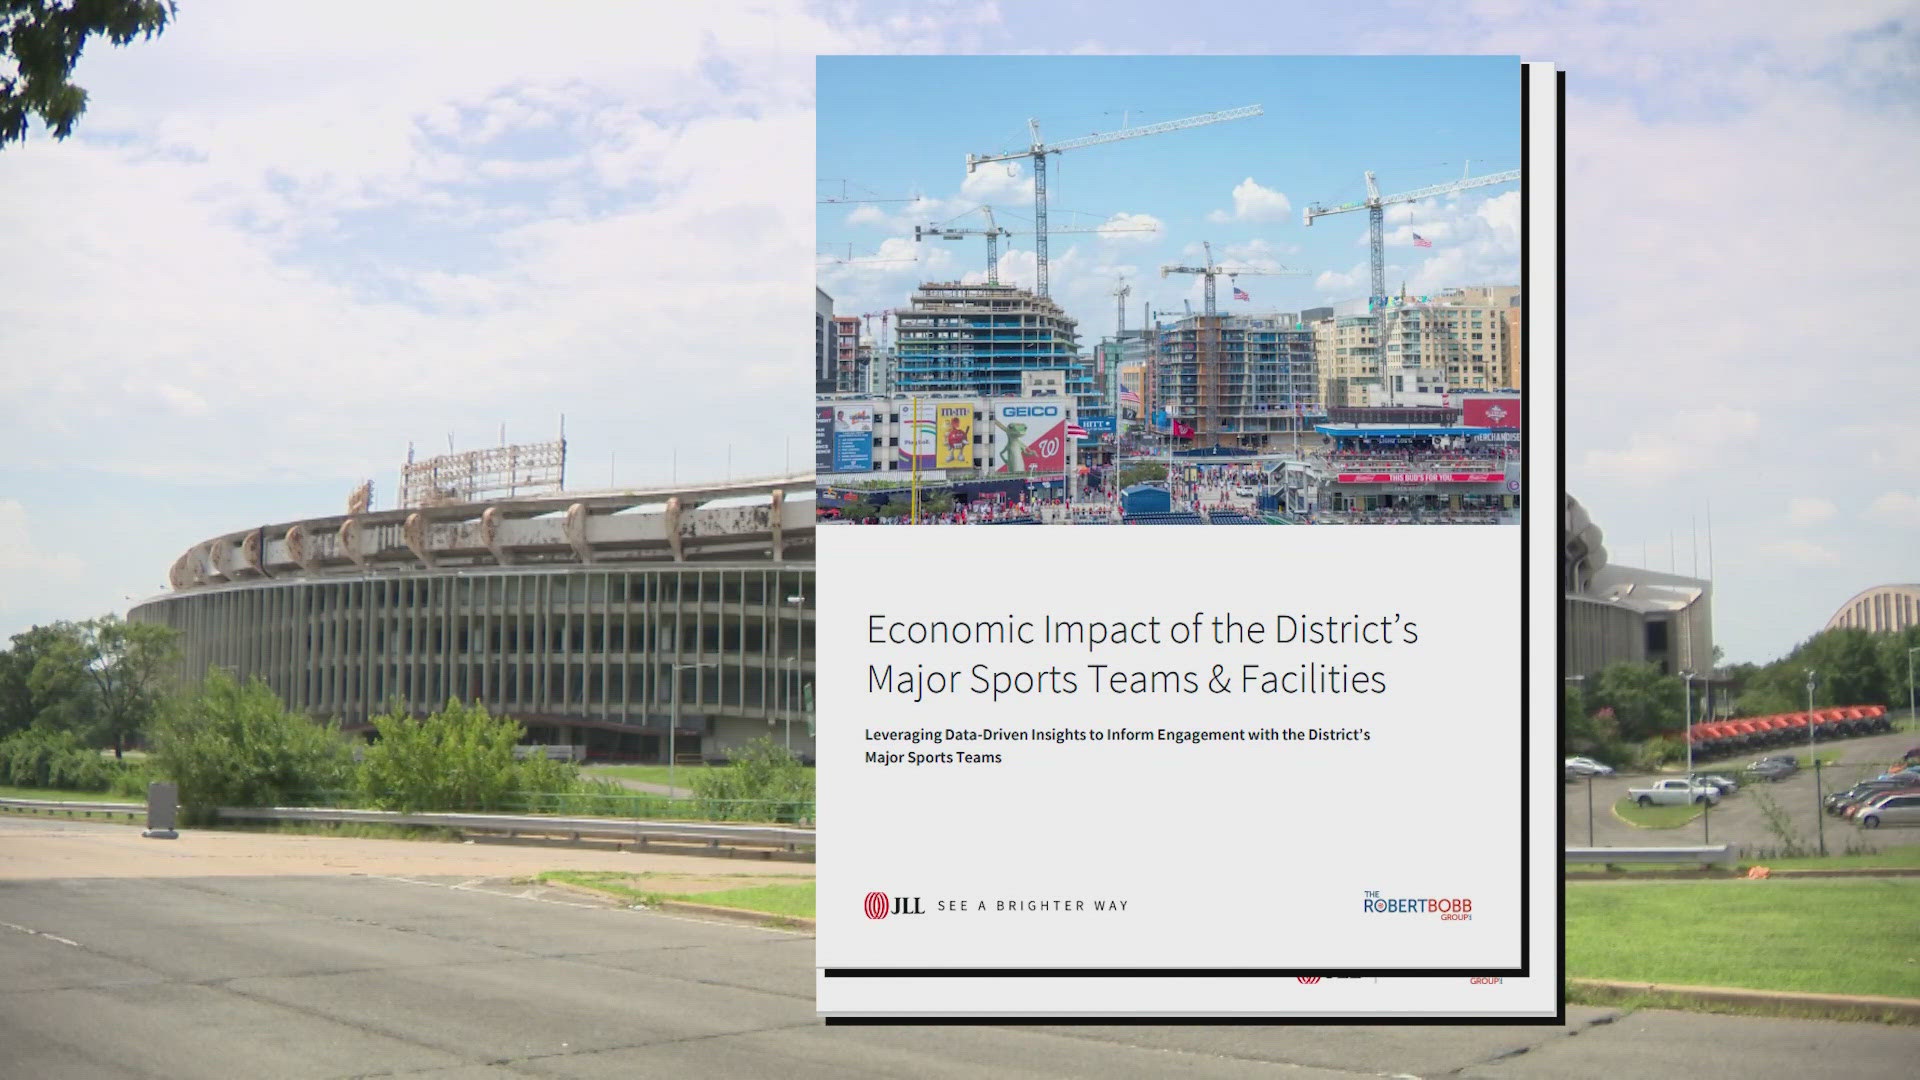 DC GOVERNMENT CONTINUED ITS FIGHT TO CONCEAL CRITICAL INFORMATION CONTAINED IN A TAXPAYER FUNDED STUDY ON HOW THE CITY COULD HELP PAY FOR A NEW COMMANDERS STADIUM.